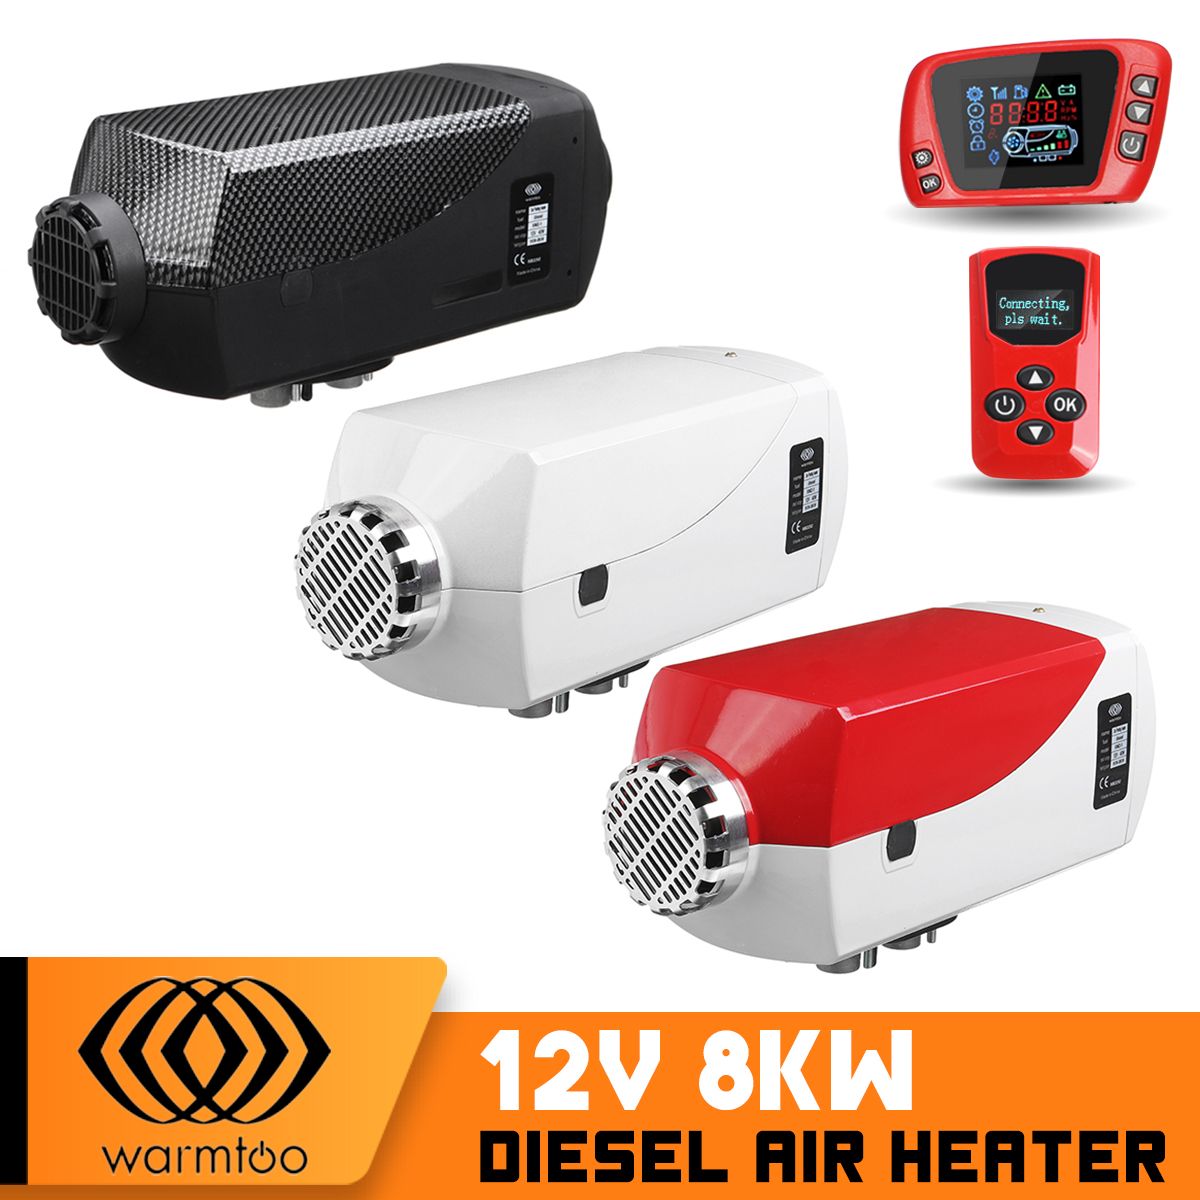 12V-8KW-Diesel-Air-Heater-Car-Parking-Heater-Red-LCD-Thermostat-Remote-Control-1557476